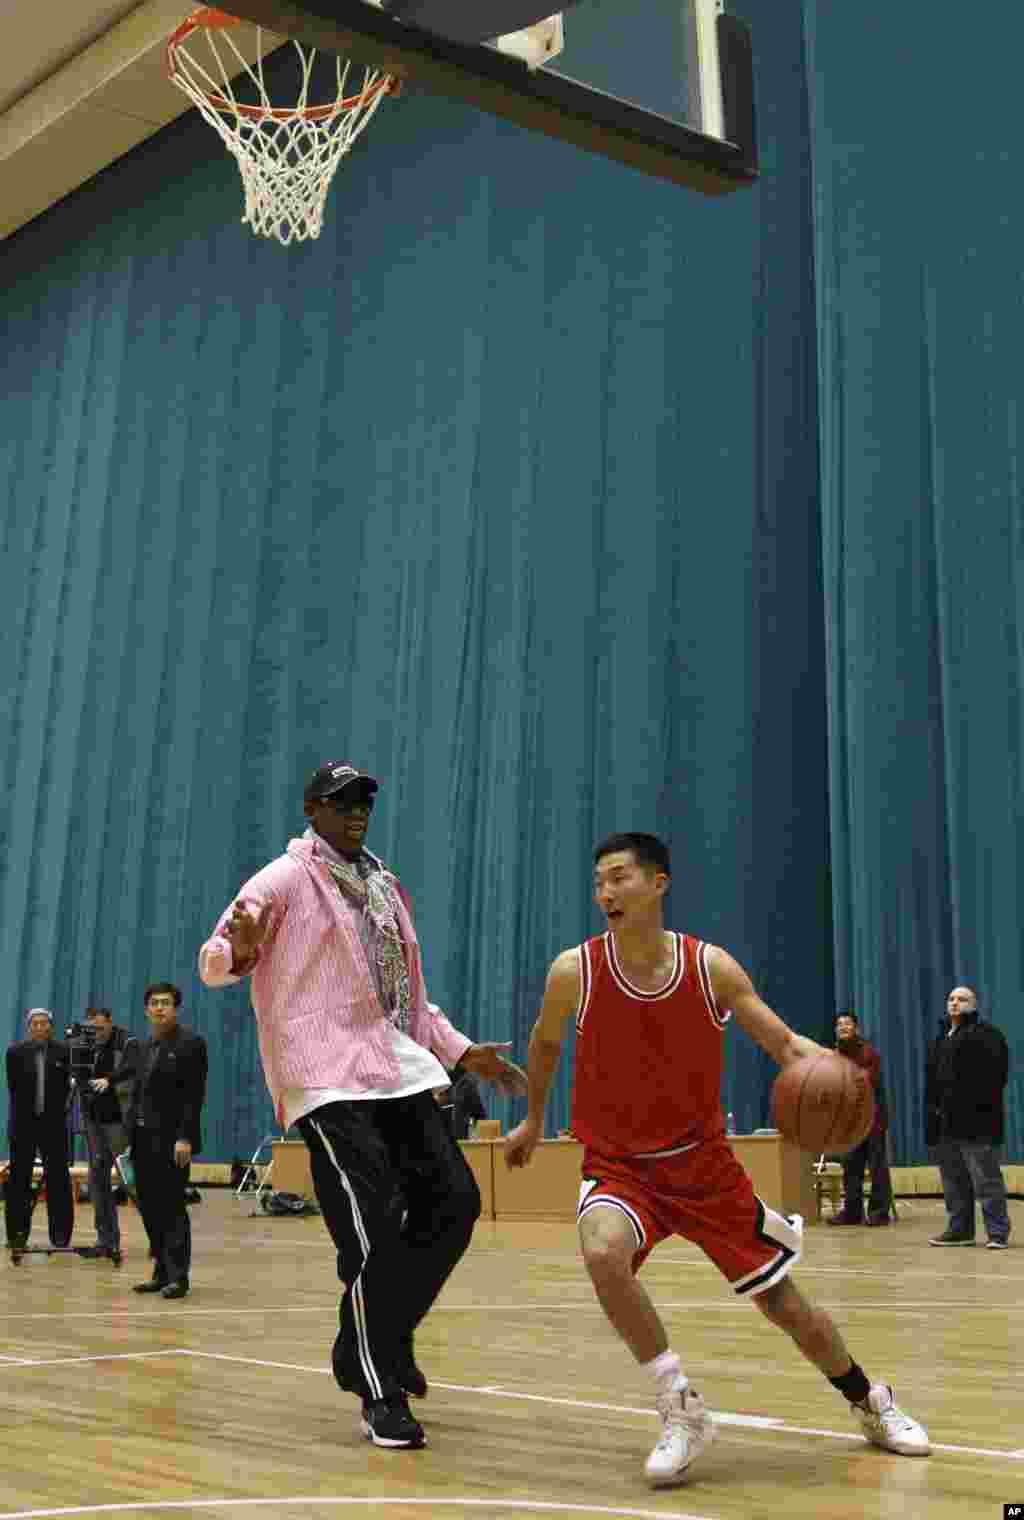 Former NBA basketball star Dennis Rodman plays one-on-one with a North Korean player during a basketball practice session in Pyongyang, North Korea, Dec. 20, 2013. 